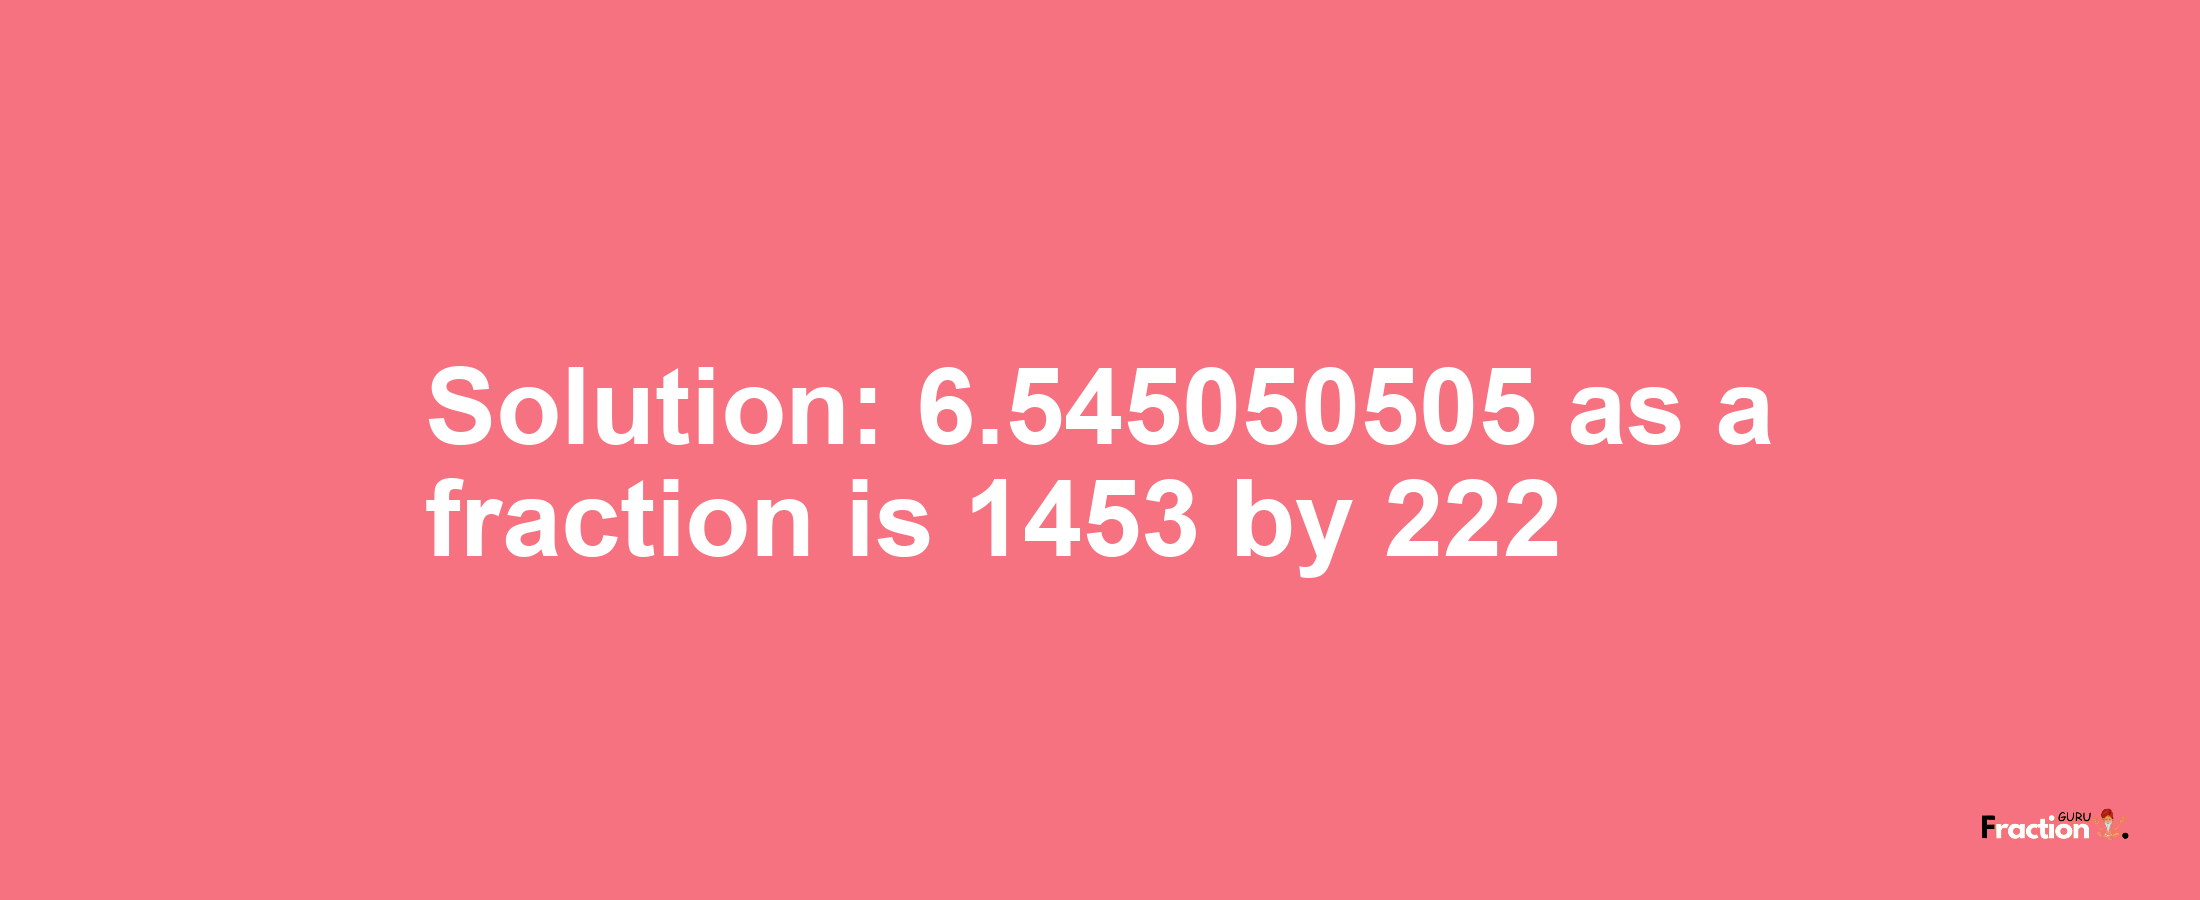 Solution:6.545050505 as a fraction is 1453/222